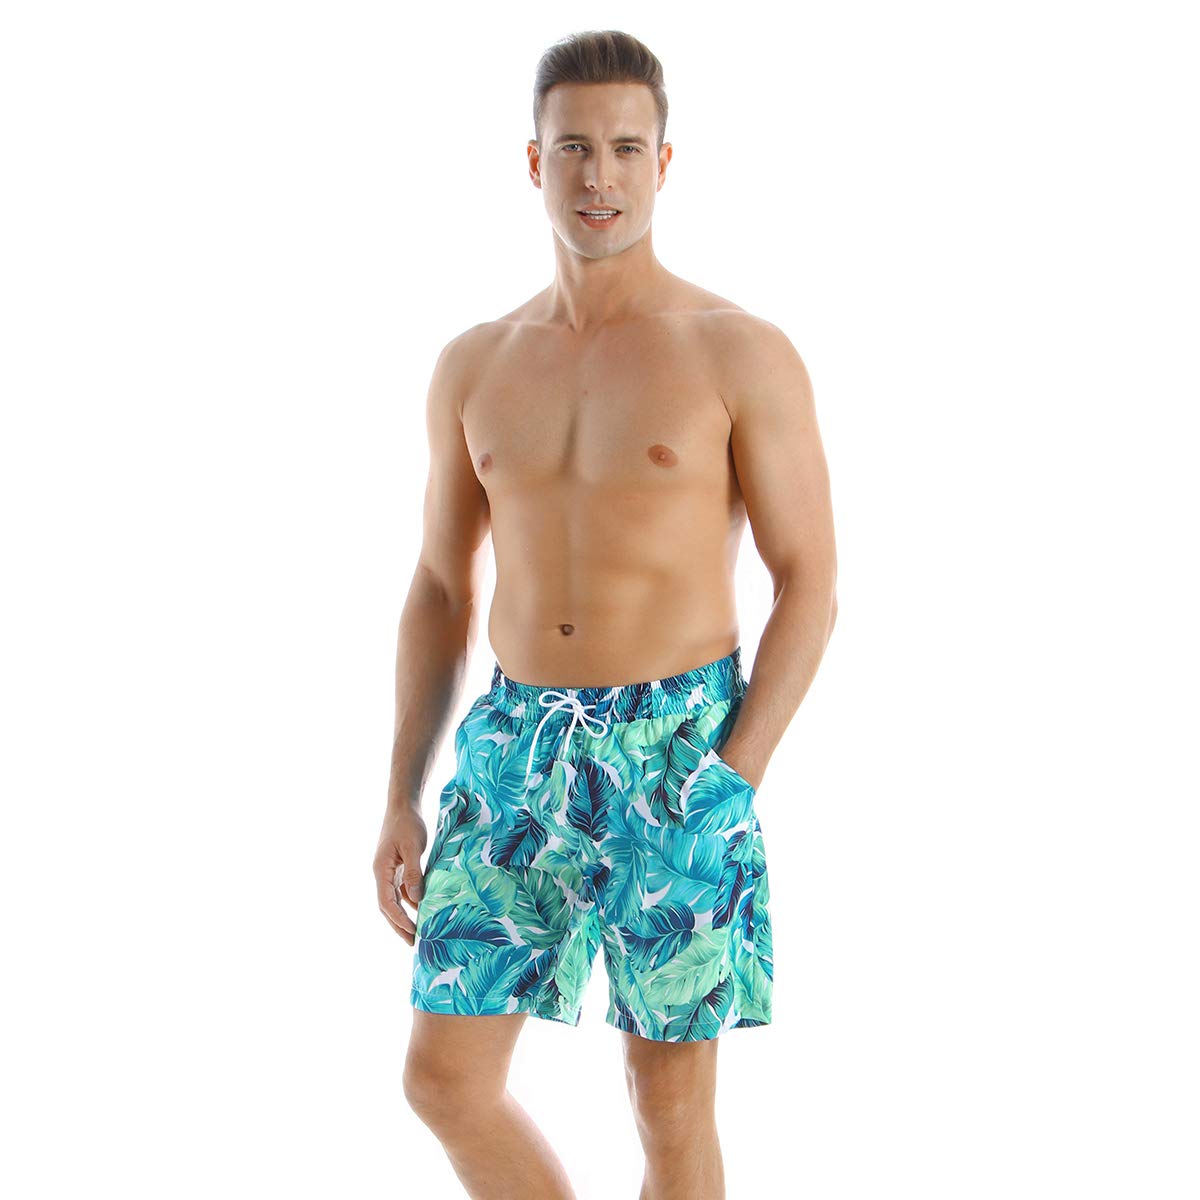 Couple Matching Swimsuits Tropical Print Hanky Hem Bathing Suits